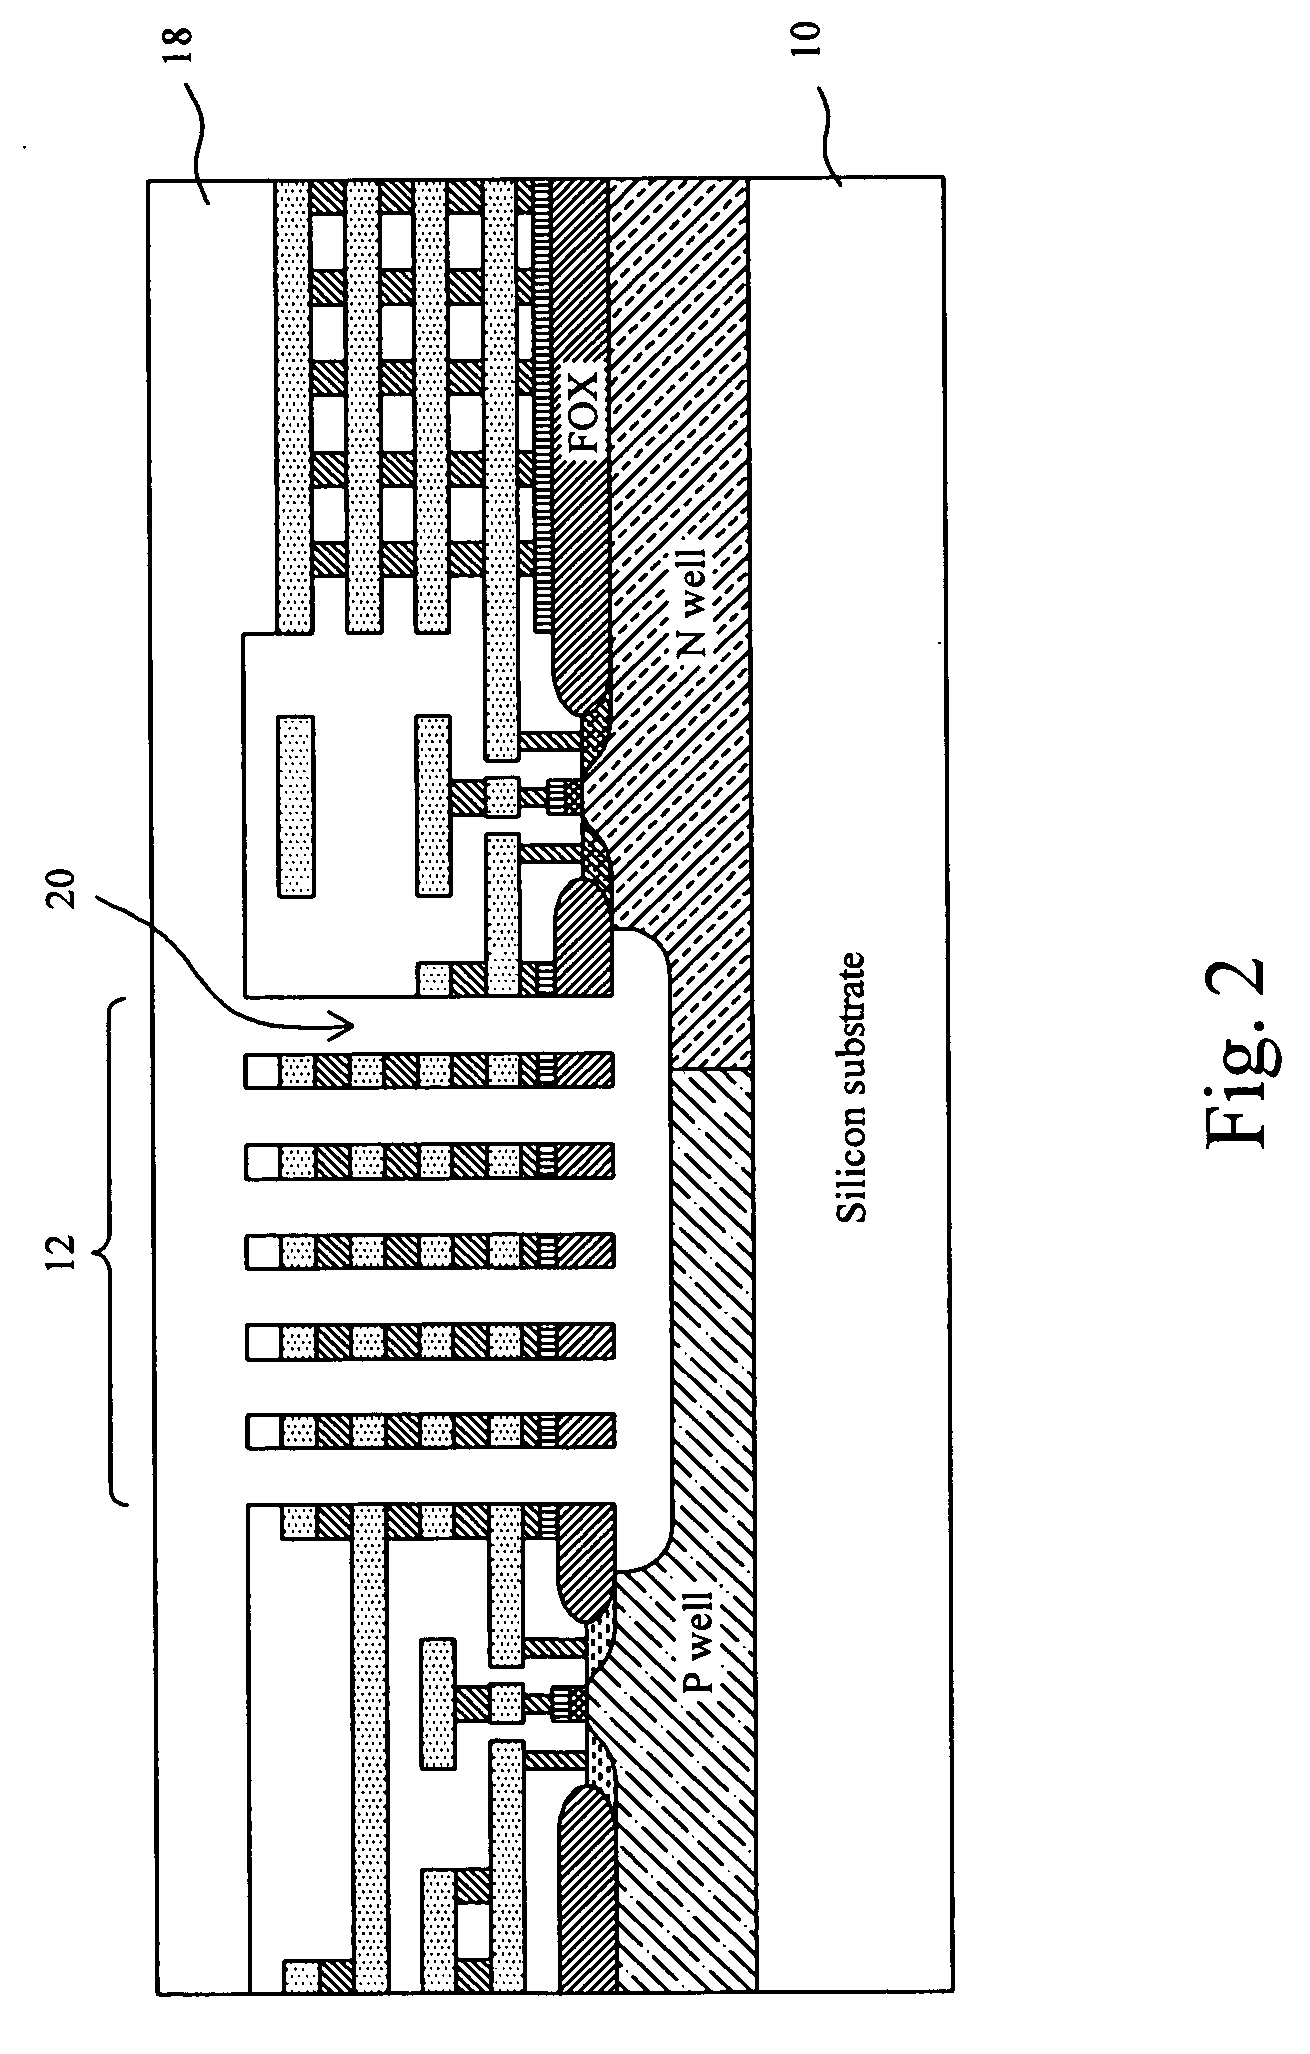 Methods for dicing a released CMOS-MEMS multi-project wafer